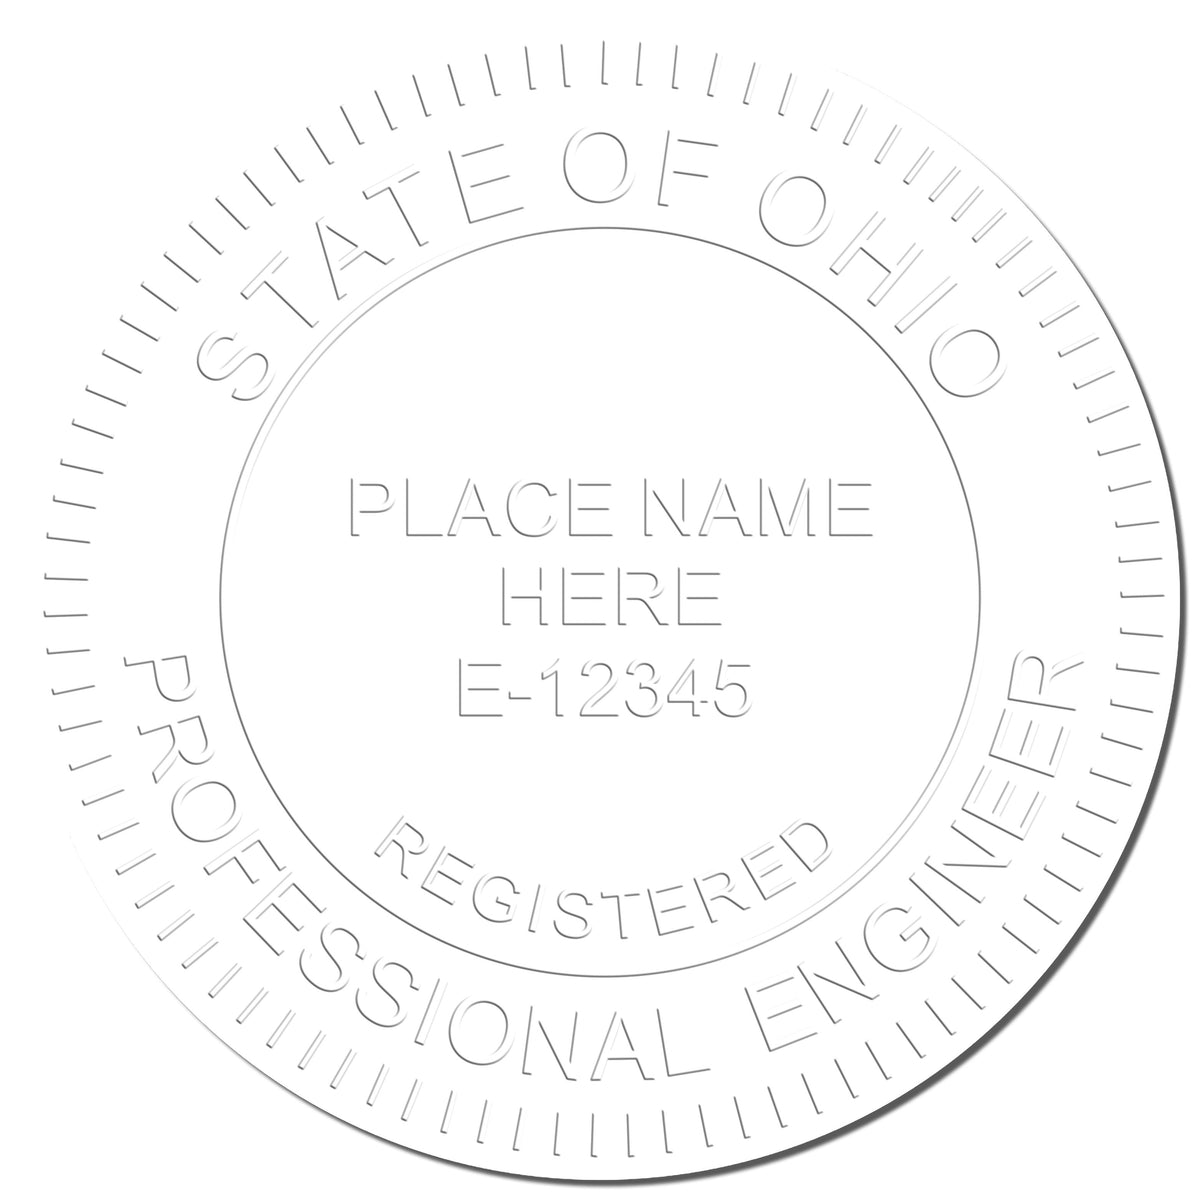 Another Example of a stamped impression of the Ohio Engineer Desk Seal on a piece of office paper.